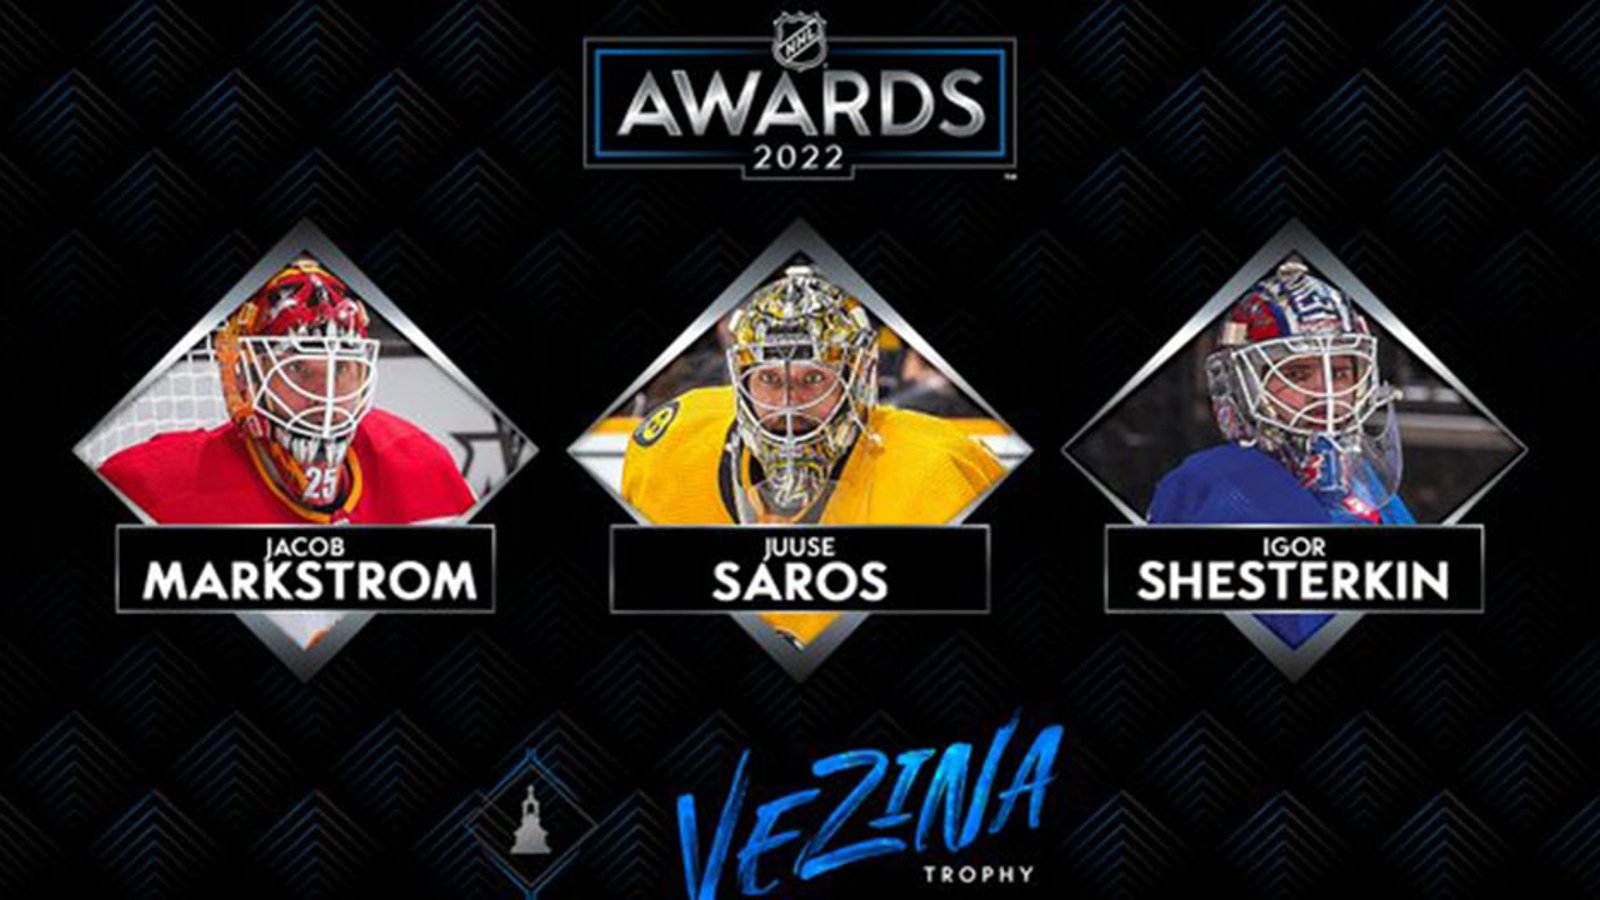 Markstrom, Saros and Shesterkin are your 2022 Vezina nominees 